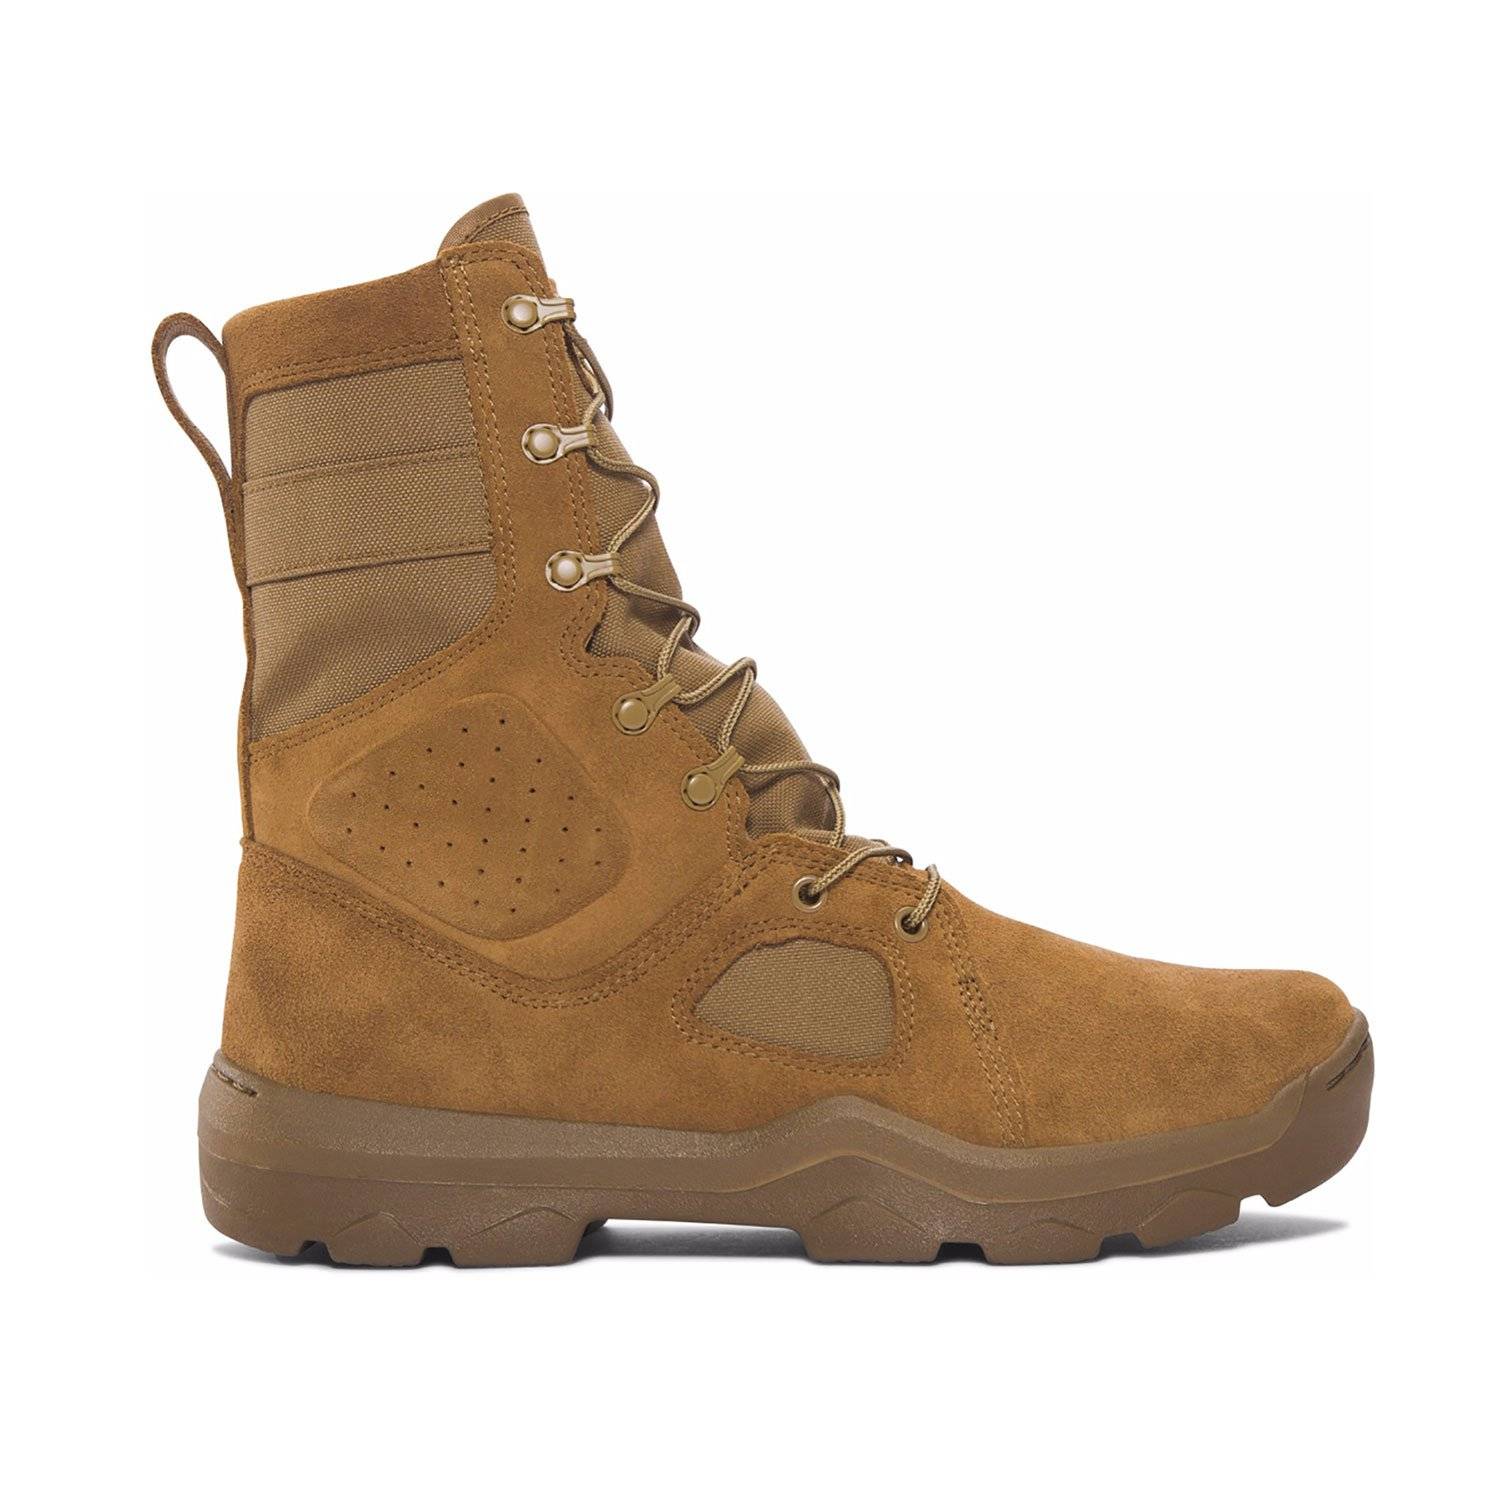 UNDER ARMOUR FNP TACTICAL BOOT